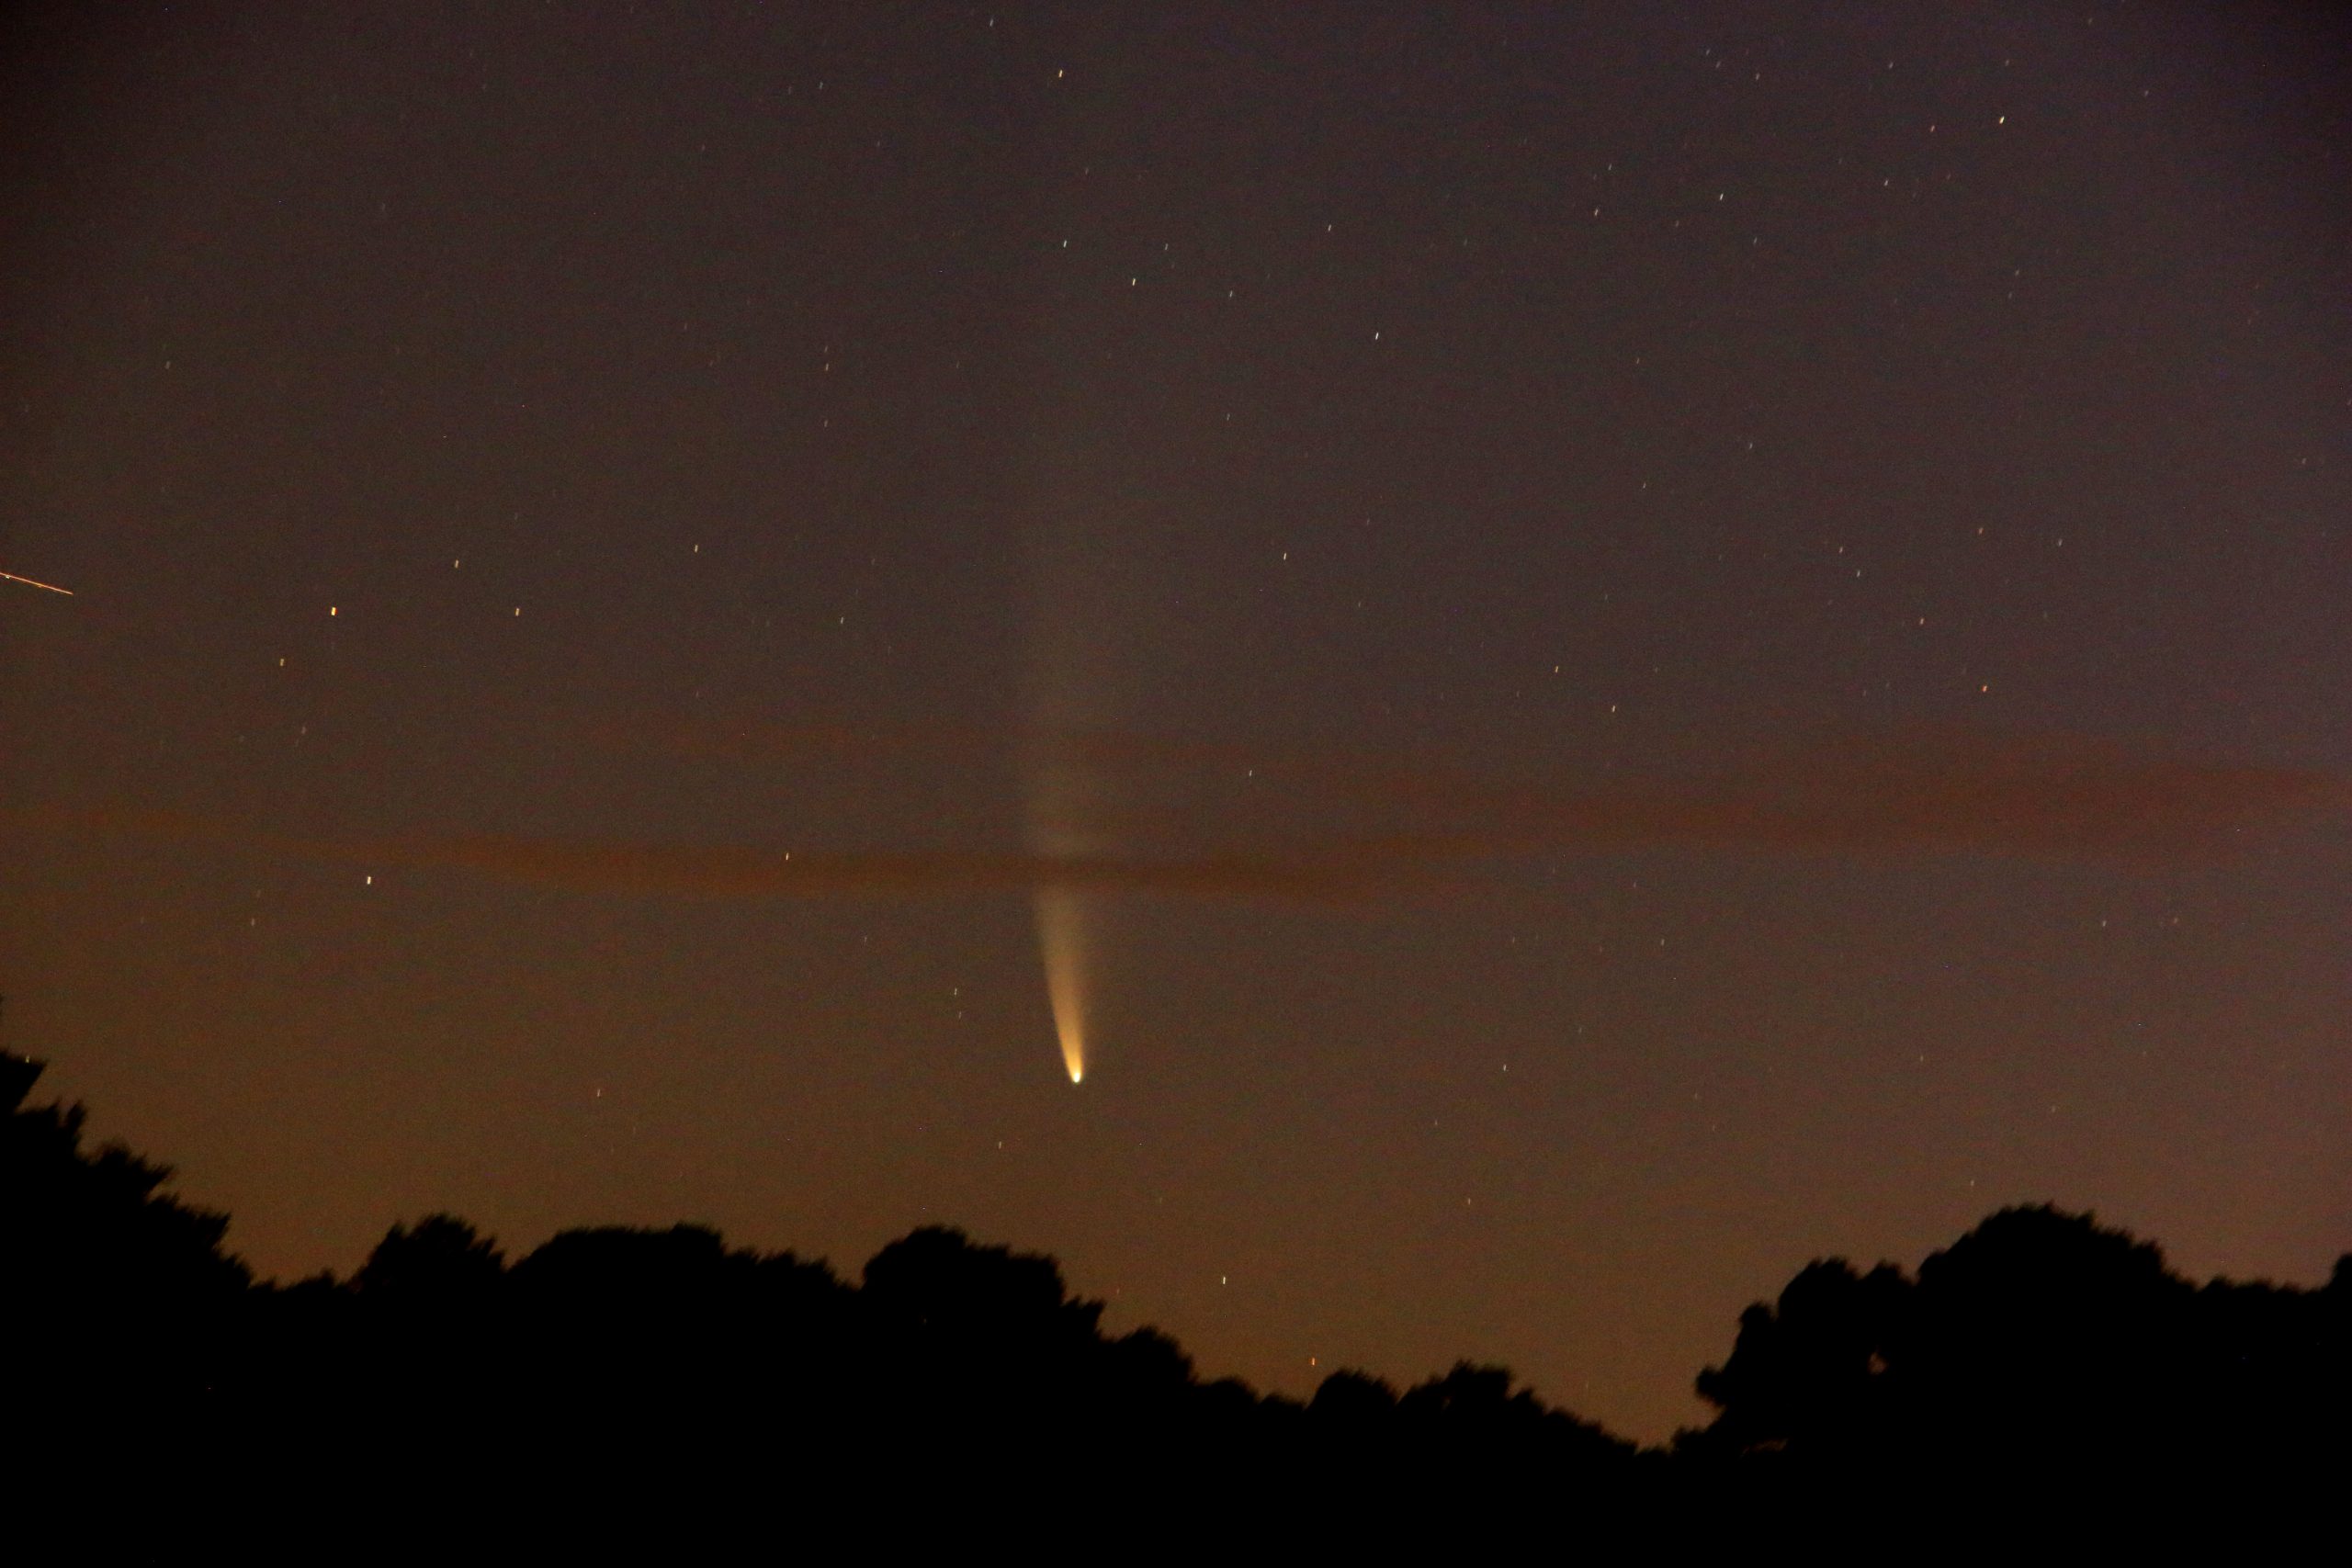 Comet Neowise over Spring Valley, just before dawn, 2020.  Photography by John Adams Hodge